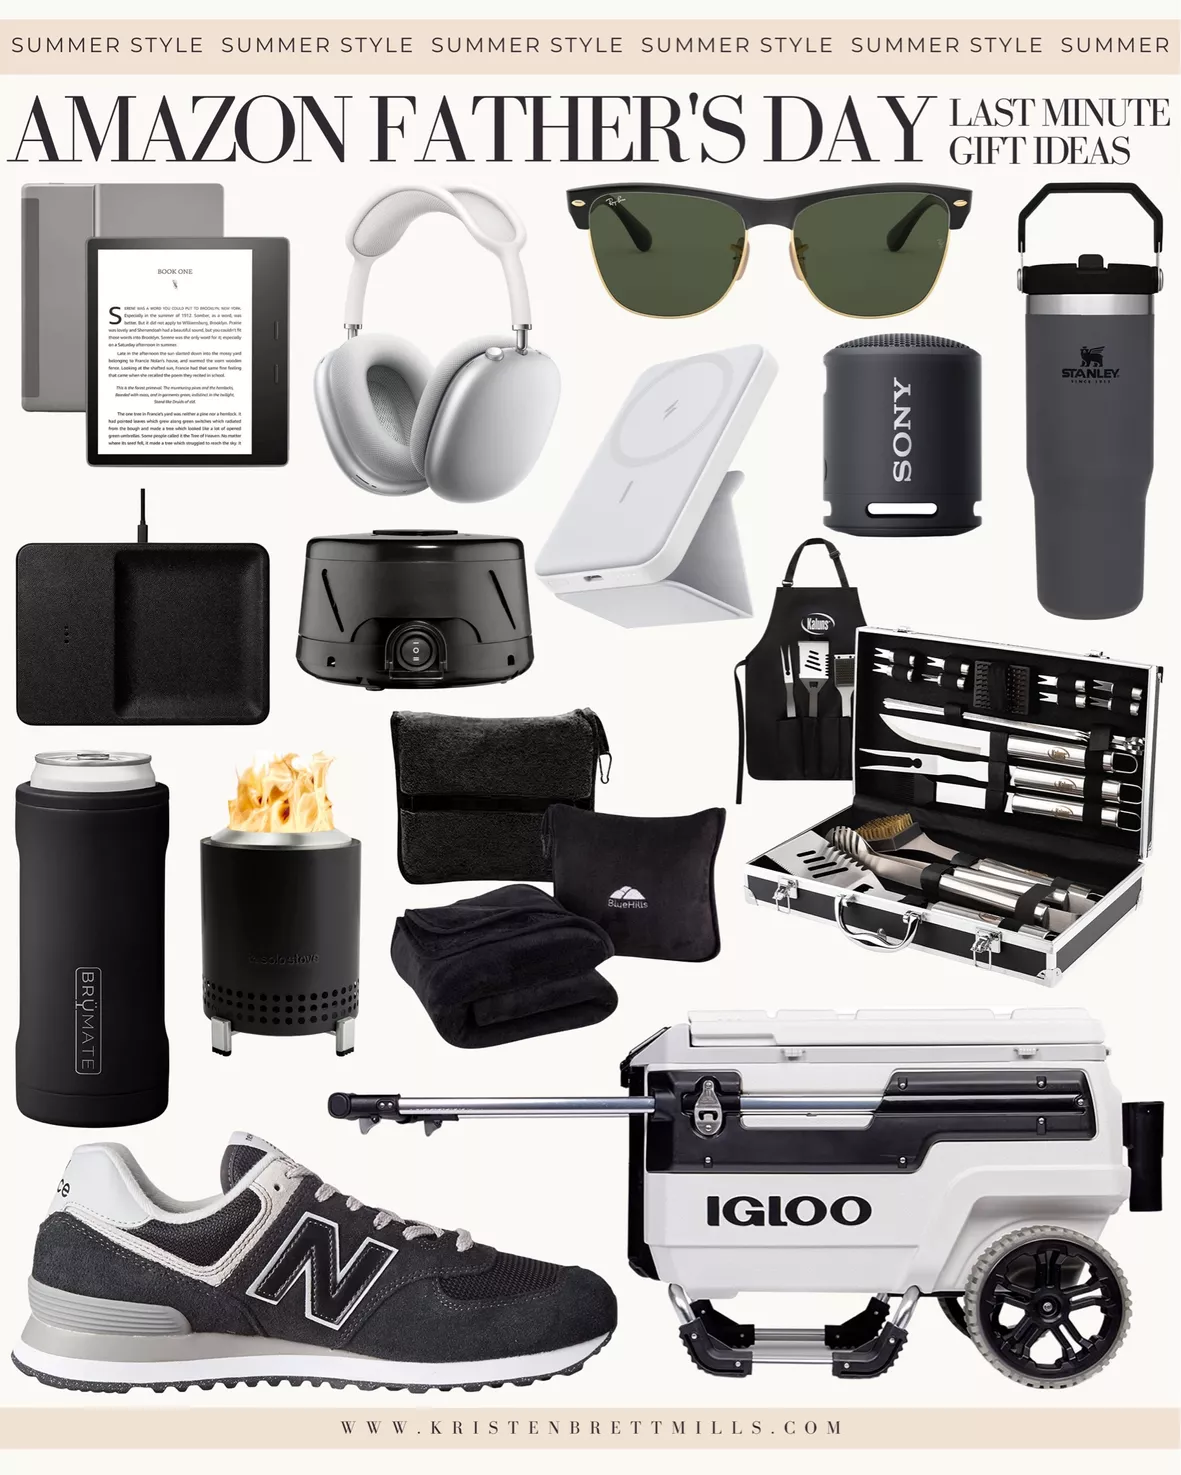 Accessories in Gifts For Men for Men